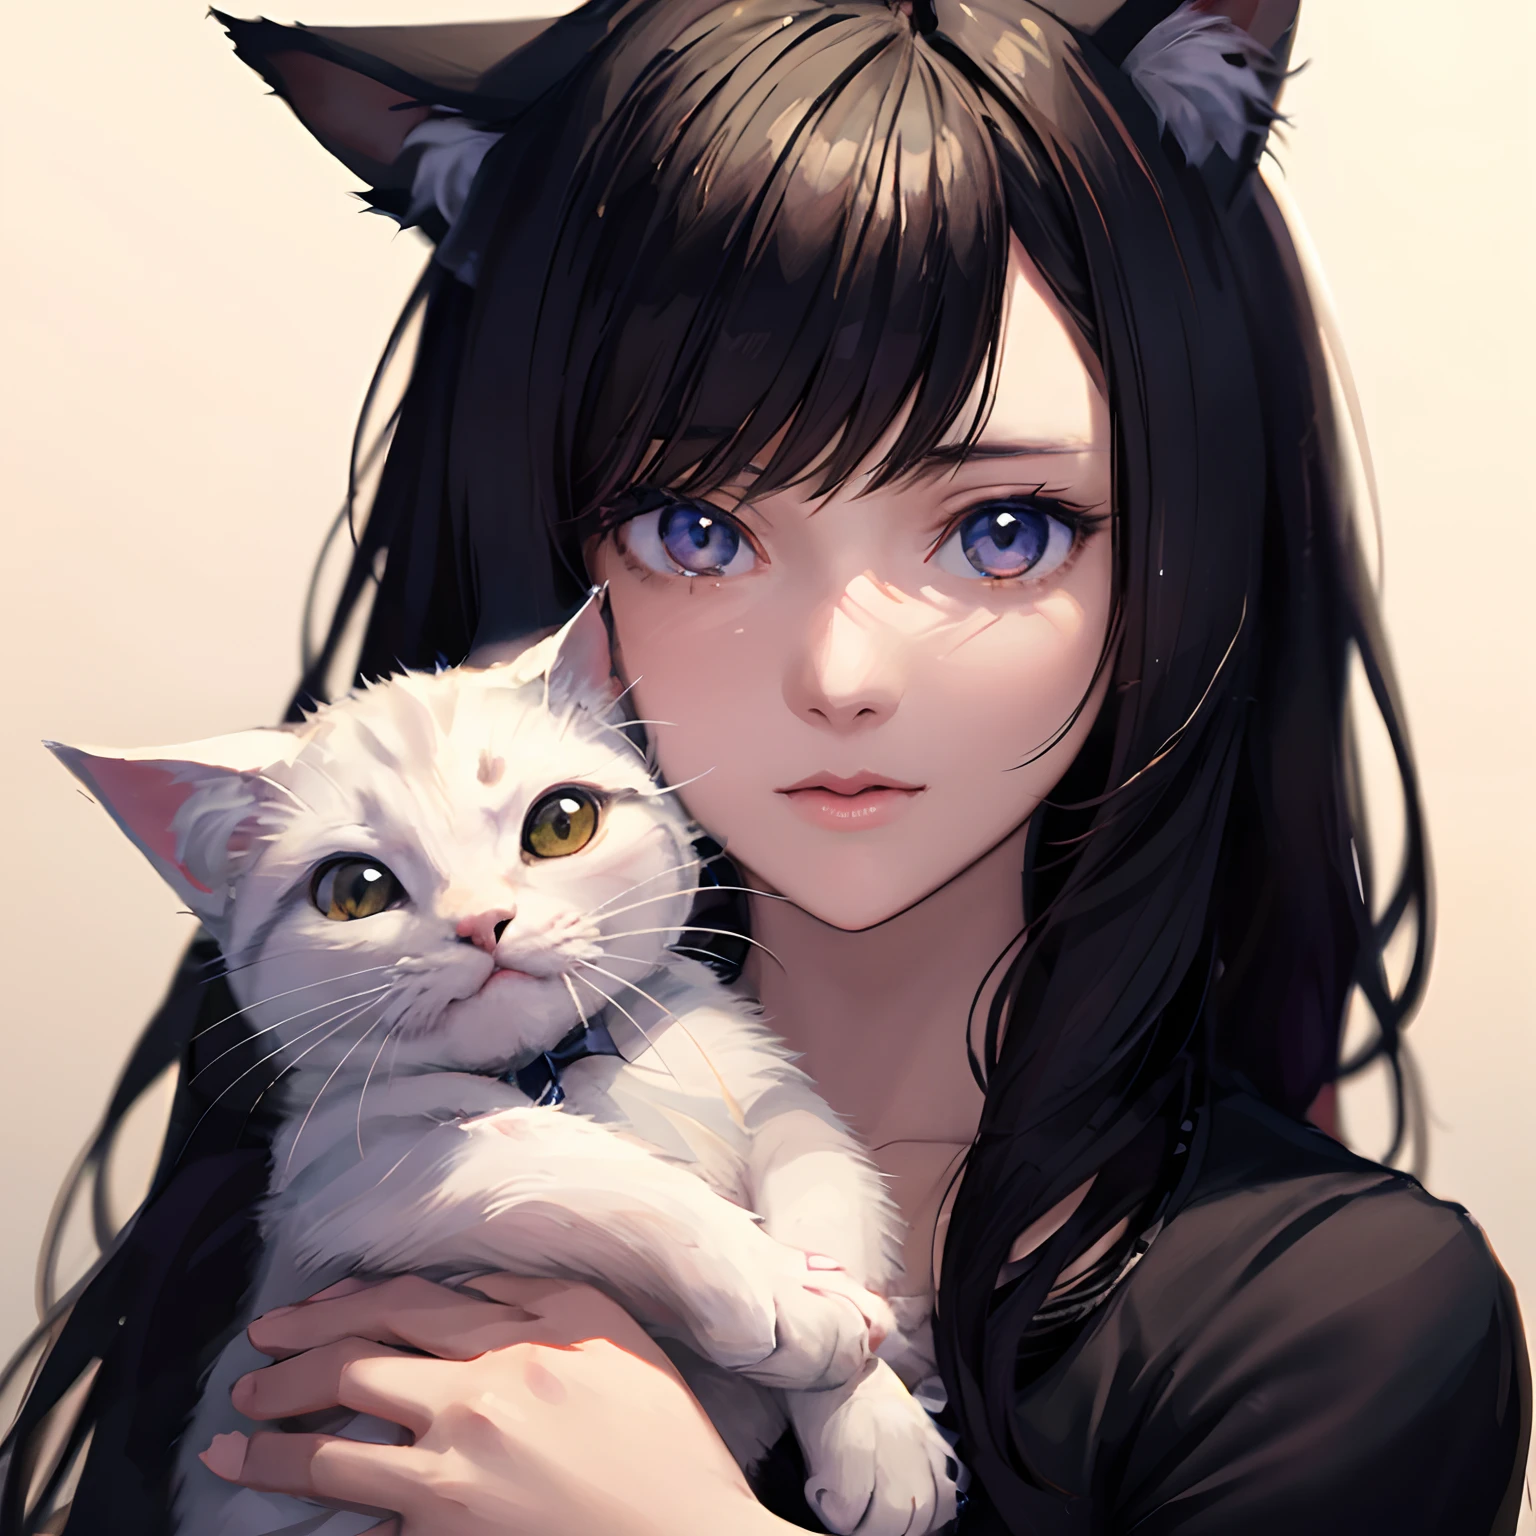 Anime girl with white cat cat ears and long hair, Anime girl with cat ears, beautiful anime catgirl, attractive cat girl, very beautiful cute catgirl, portrait of ahri, beautiful young catgirl, realistic anime cat, Art Germ. Anime Illustration, Very Beautiful Anime Cat Girl, Guviz-style artwork,Surprised look